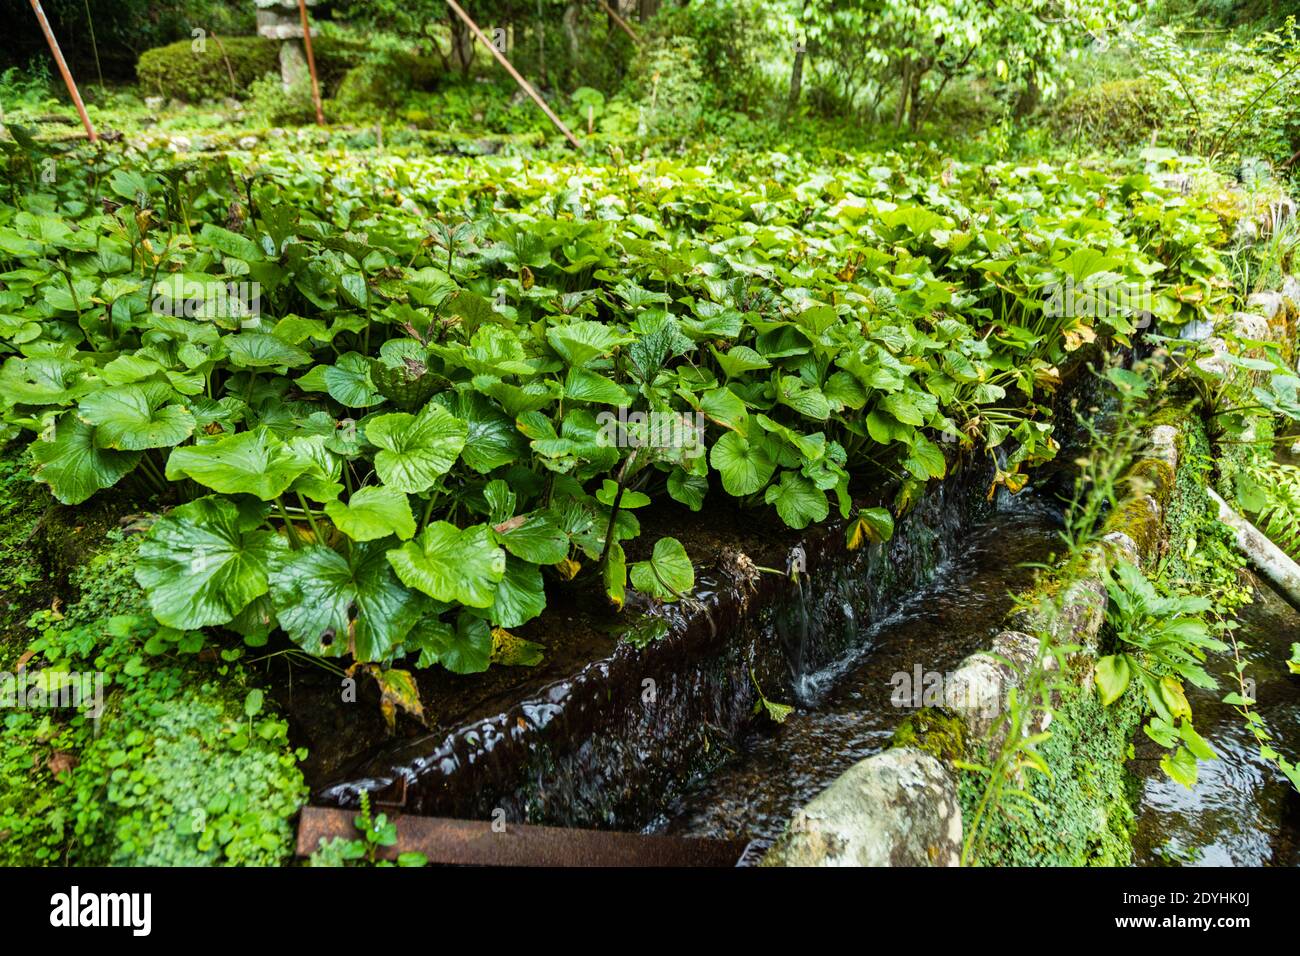 Wasabi grows outdoors in terraced fields. The plant needs running water. Wasabi is considered a very demanding plant that grows slowly Stock Photo